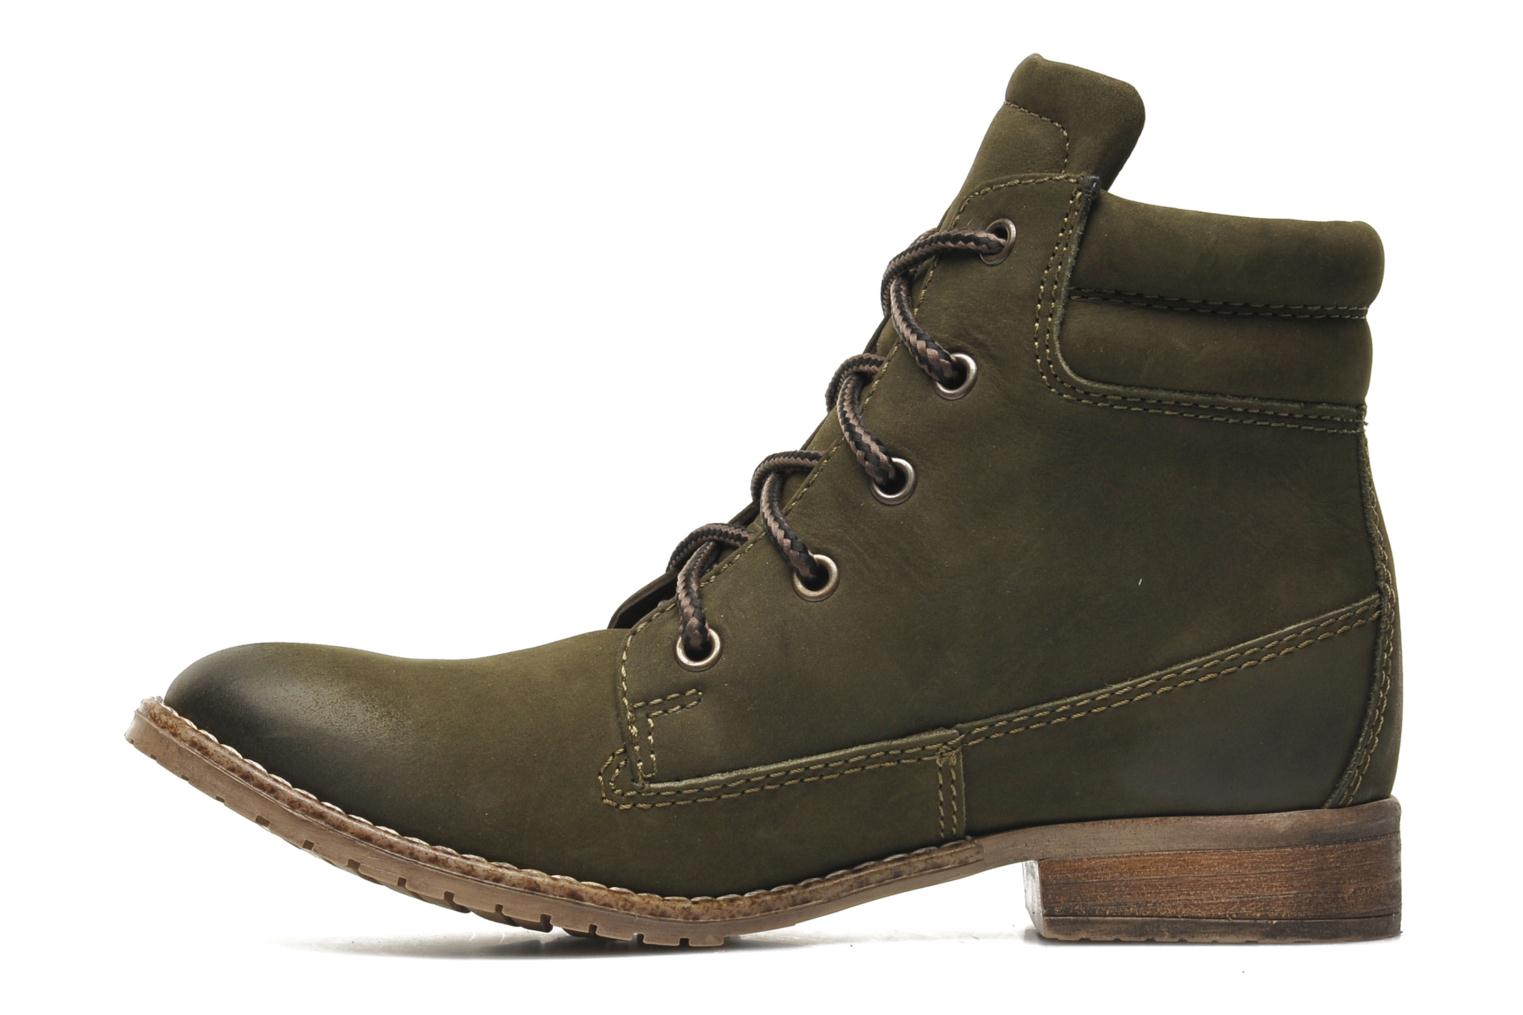 Steve Madden MANTRAA Ankle boots in Green at Sarenza (198846)